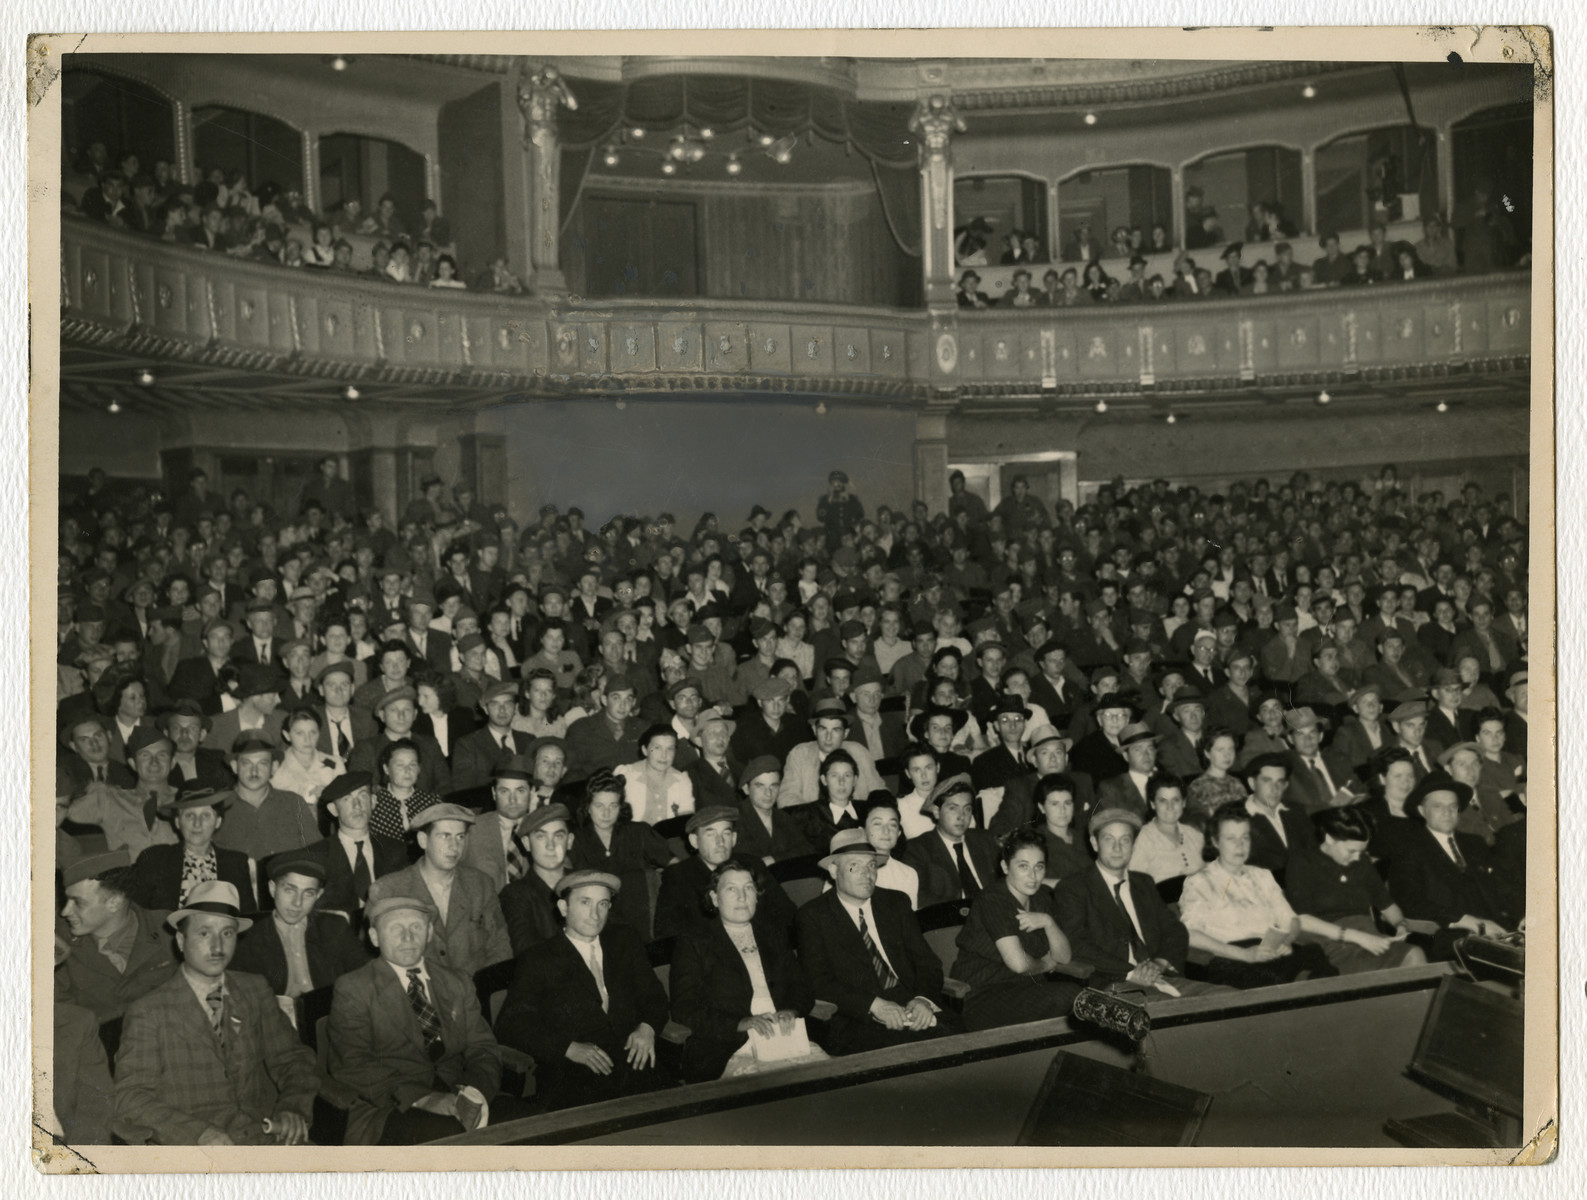 Jewish displaced persons attend the first High Holiday services after liberation held in the Stuttgart opera house.